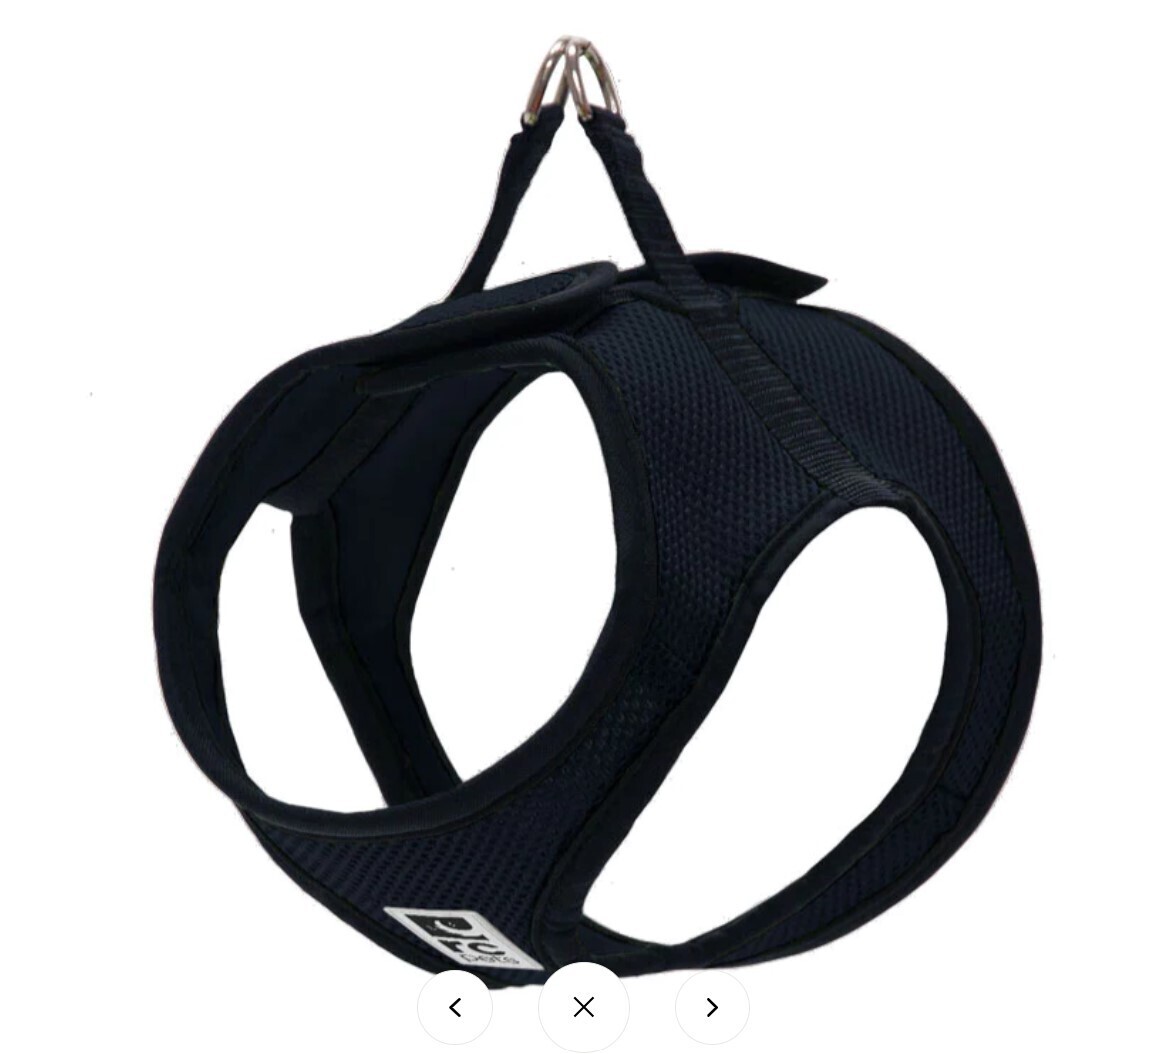 RCPets Cirque Harness Step-in Sm Black